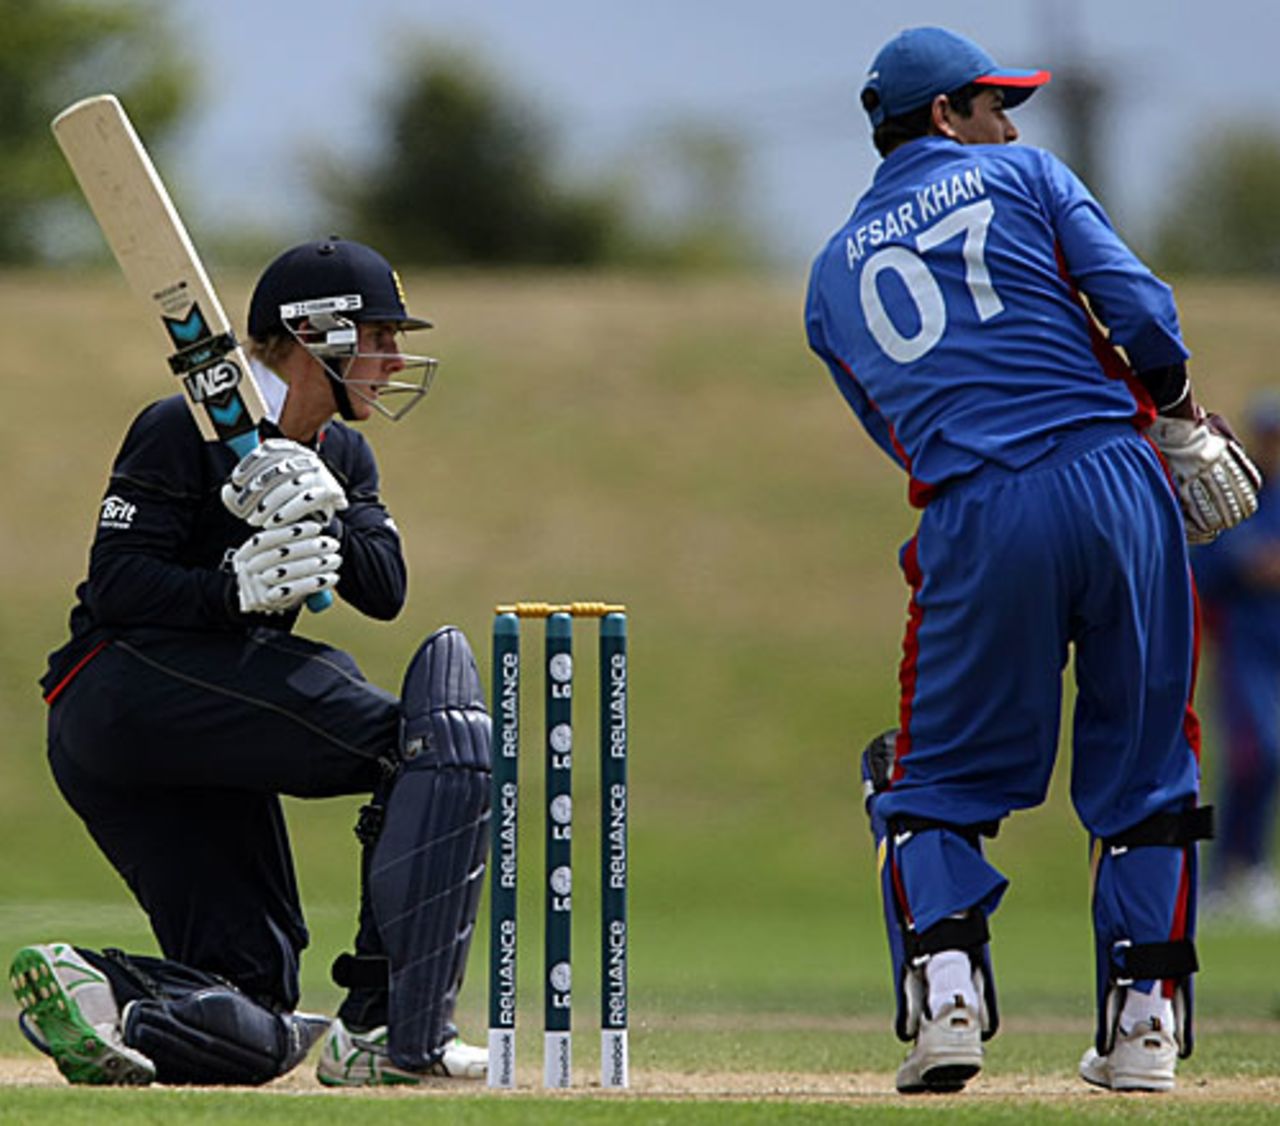 Chris Dent shovels one to the on side during his unbeaten 53, Afghanistan Under-19s v England Under-19s, 13th Match, Group A, ICC Under-19 World Cup, Christchurch, January 18, 2010